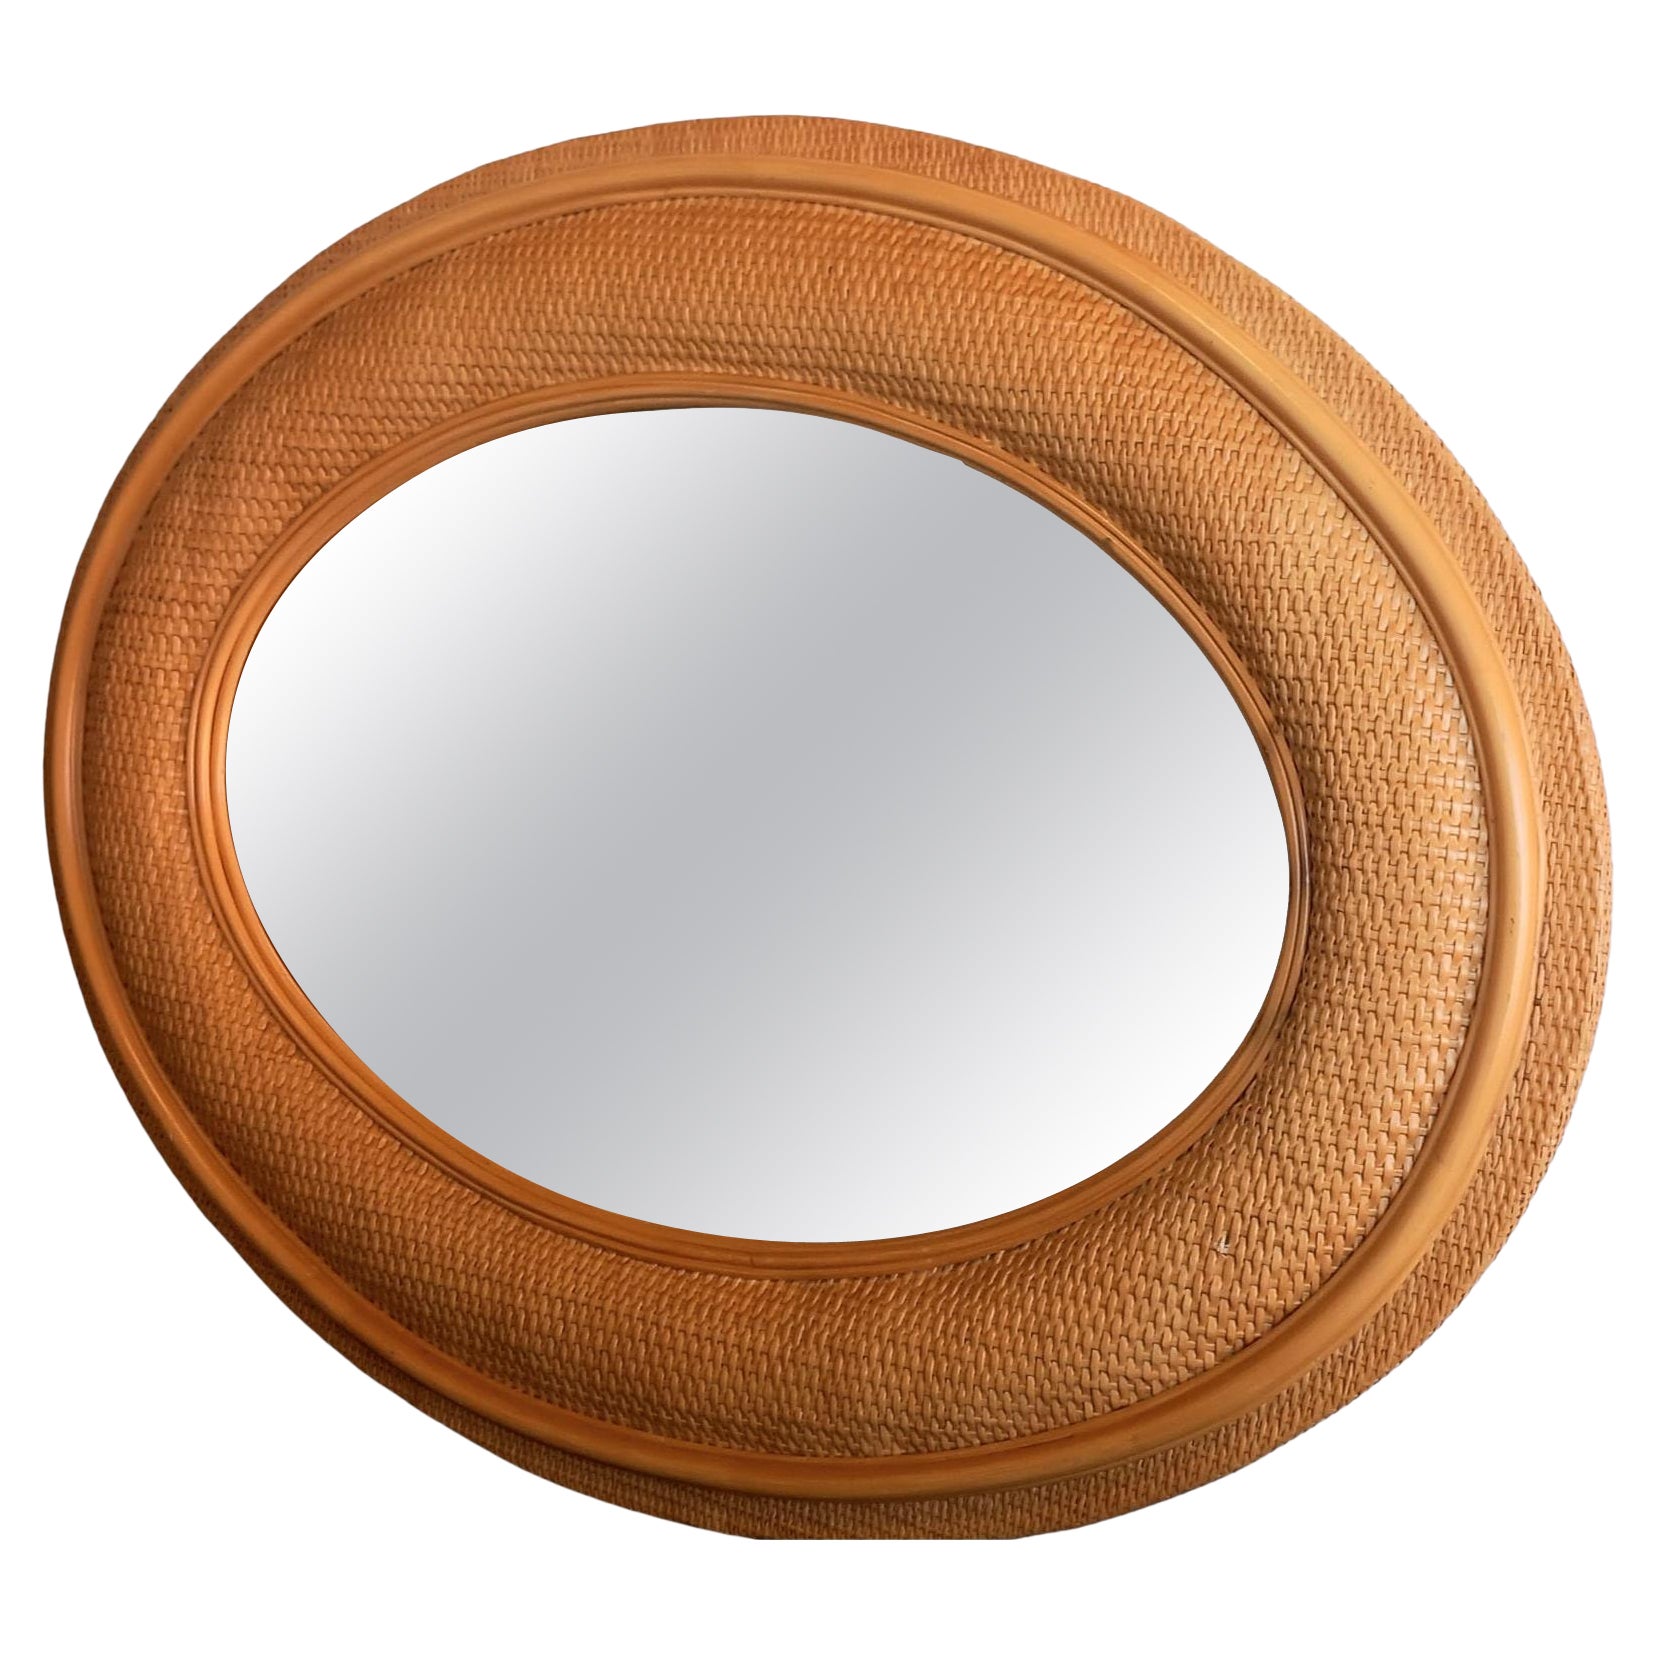 Excellent quality 
Not common

Large oval rattan mirrors
  can be placed vertically or horizontally
  We have these unusually large size mirrors
  They are impressive large size mirrors.
They are carefully made with a fantastic finish, even on the